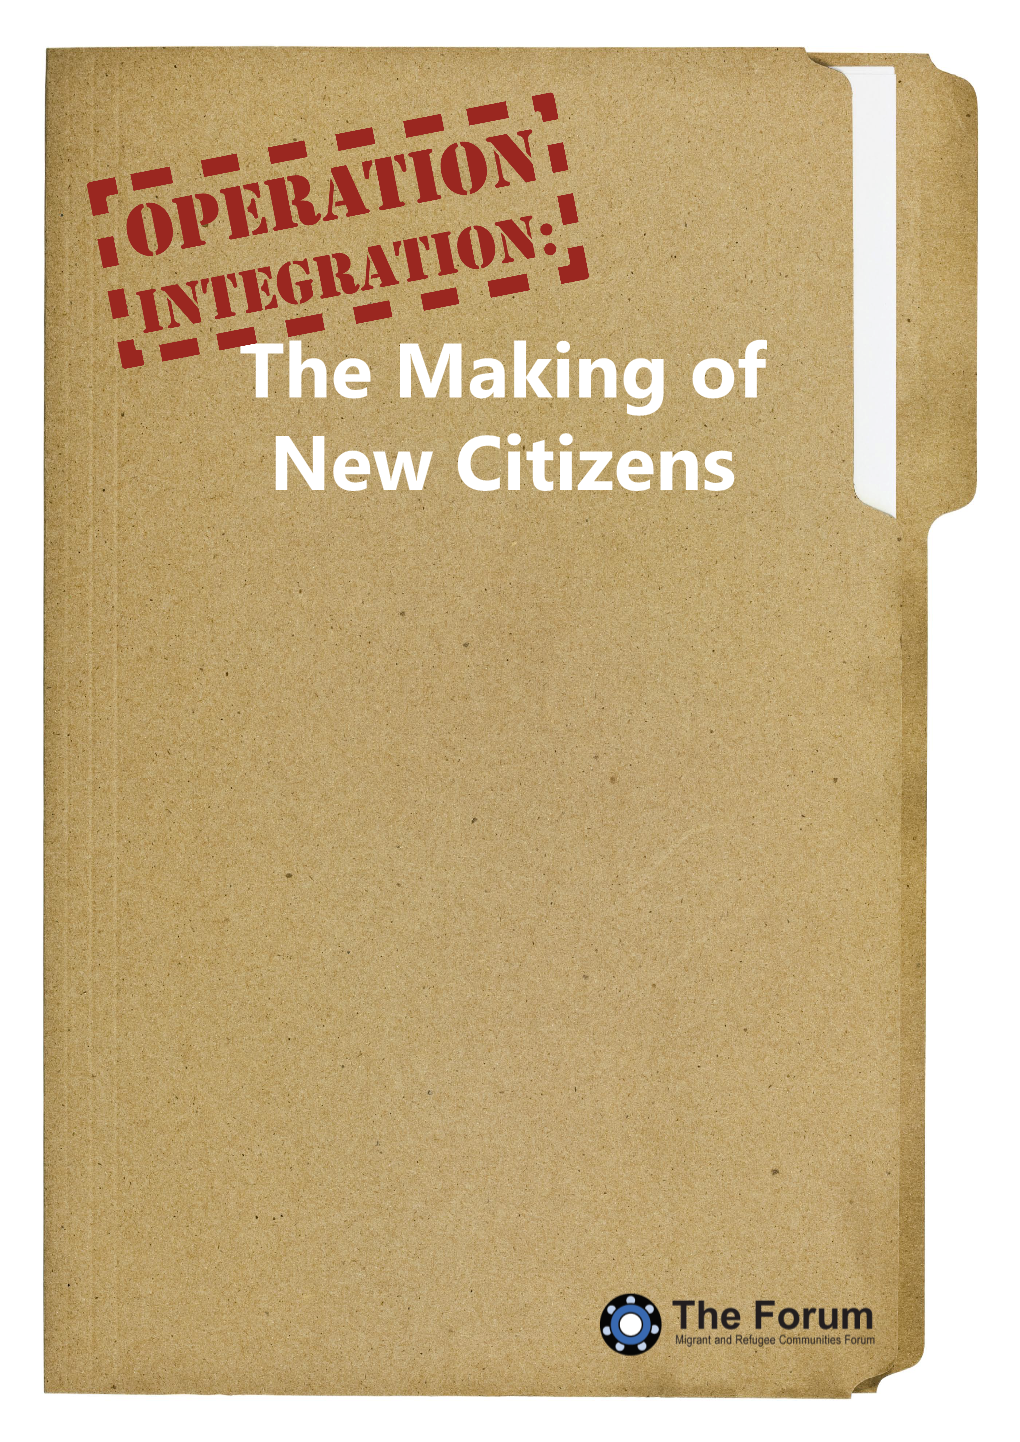 The Making of New Citizens